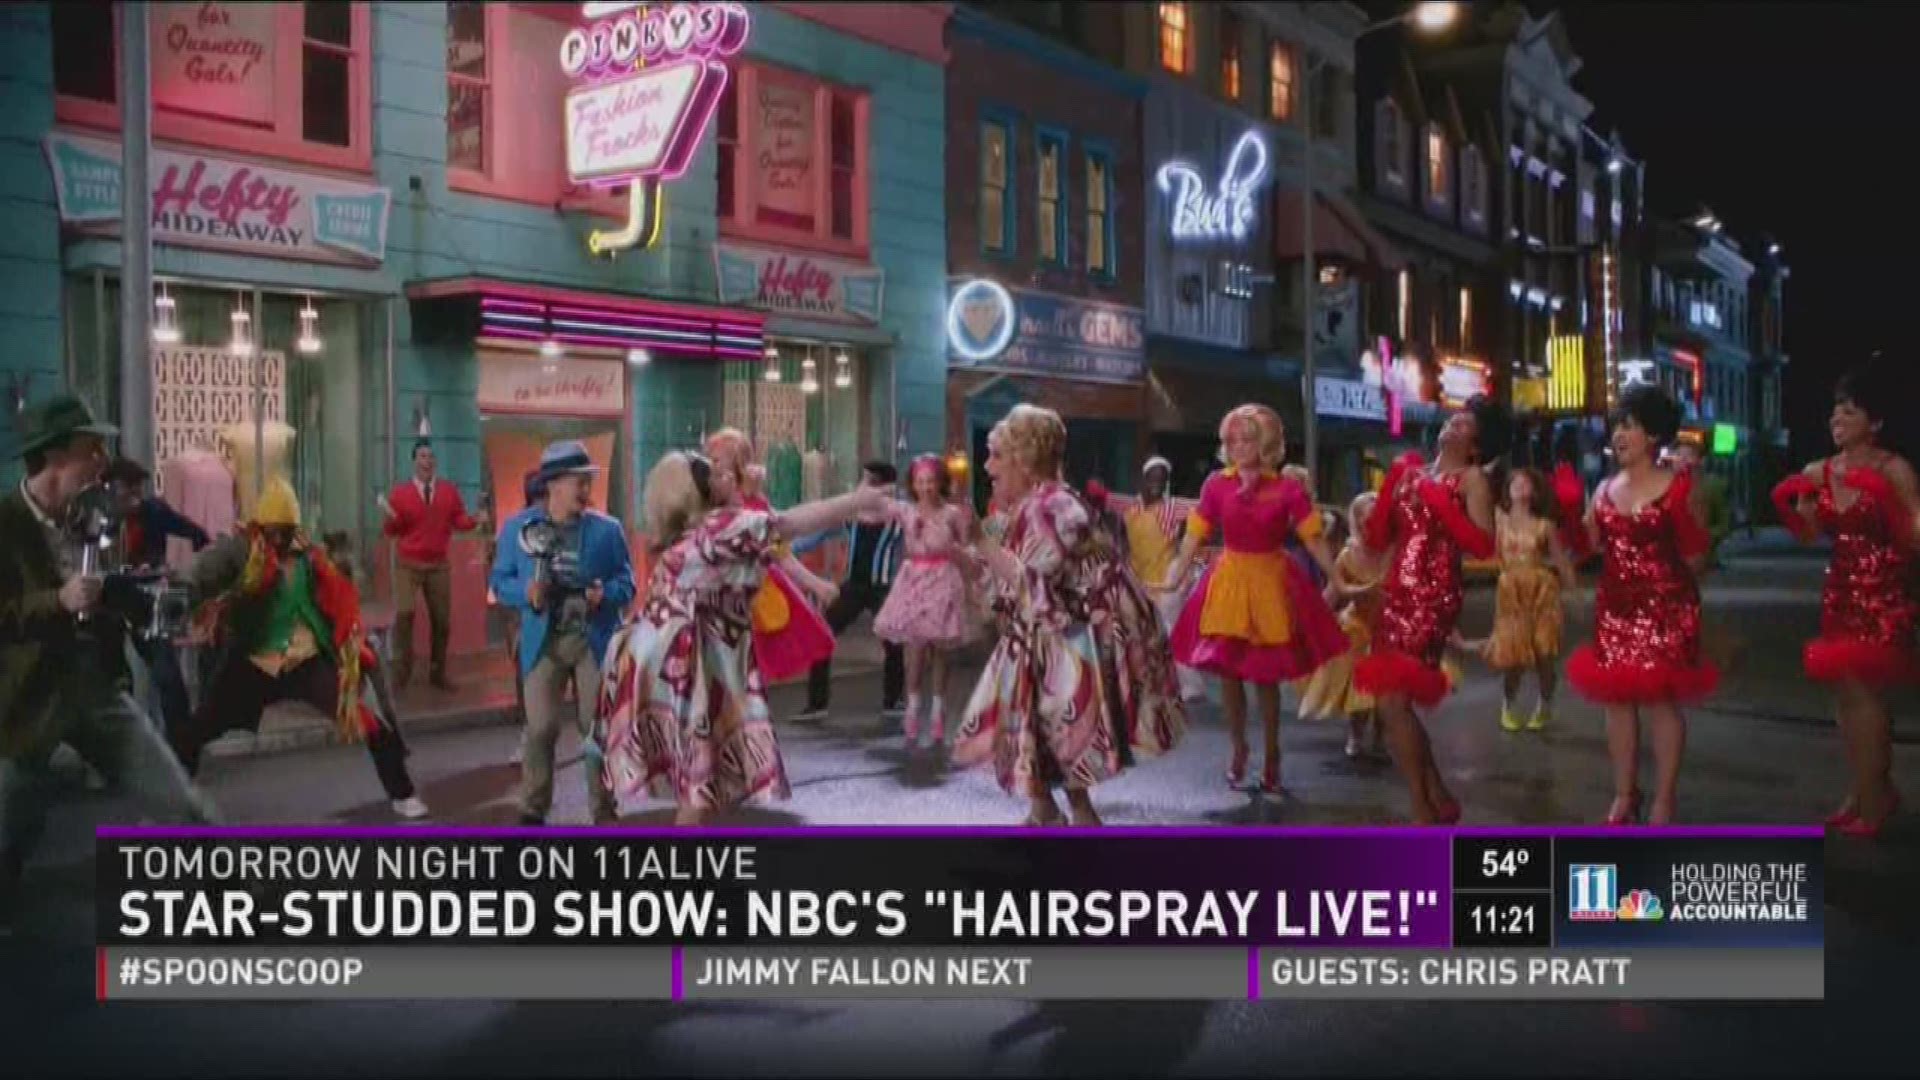 how to watch hairspray live for free